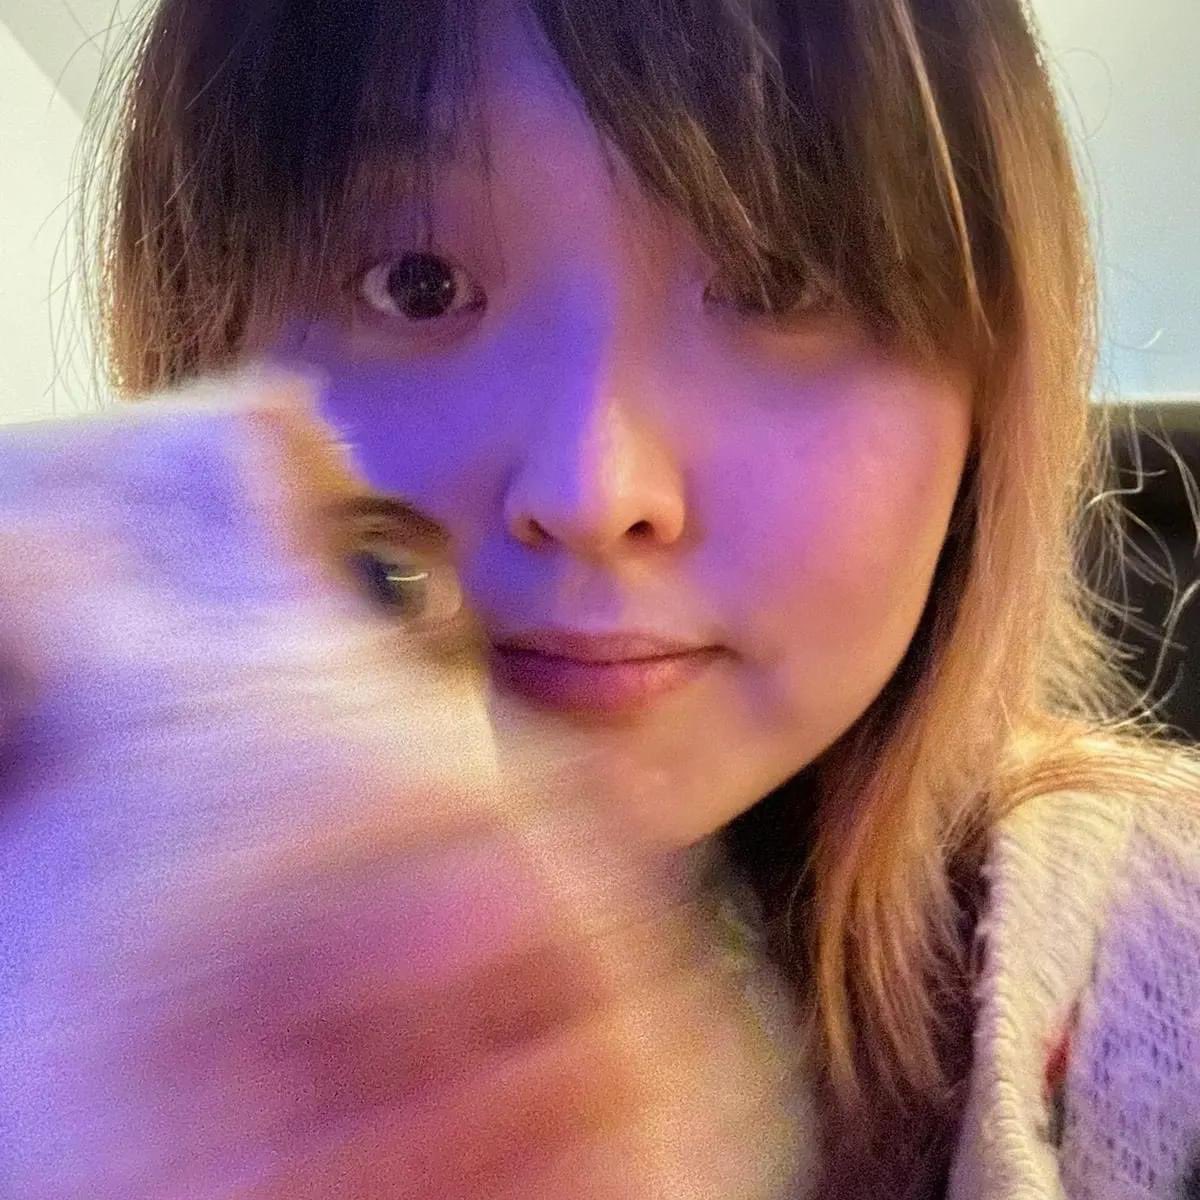 Happy Easter! I tried to get a nice photo with the puppy but she had other ideas 😂. Hope you all have an amazing weekend however you are celebrating it!

#dogsofinstagram #fypシ #fyp #reotheband #puppy #femalefrontedrock #japanesegirl #femalesinger #easter